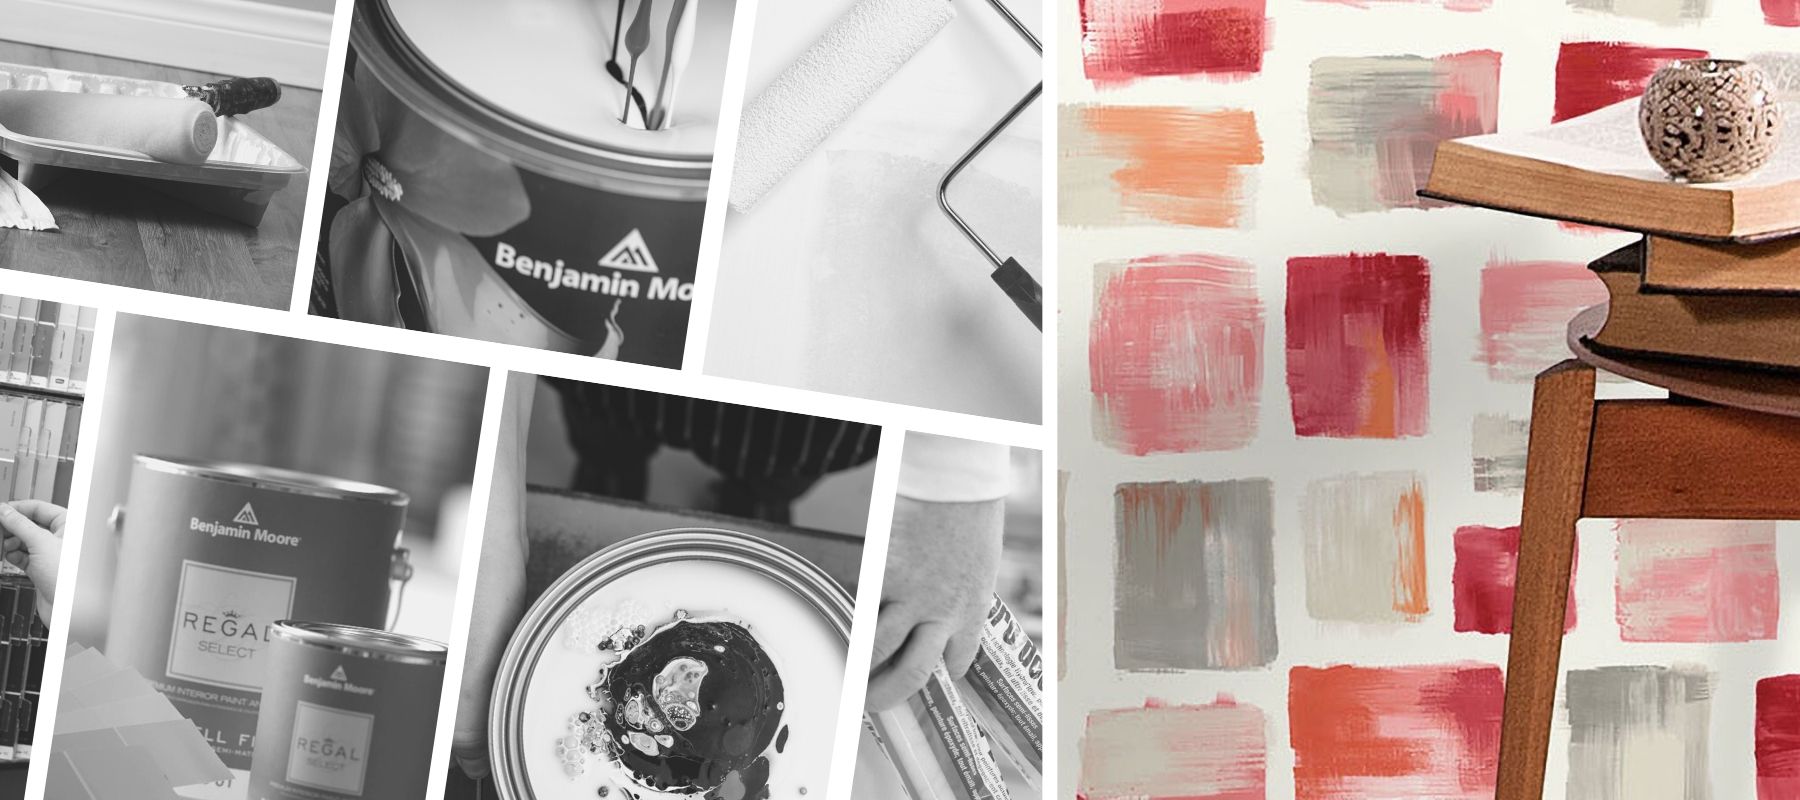 image of wallpaper overlayed ontop of collage of paint store items. wallpaper is red, pink, orange and gray, loooks like paint strokes of each color on the wall.